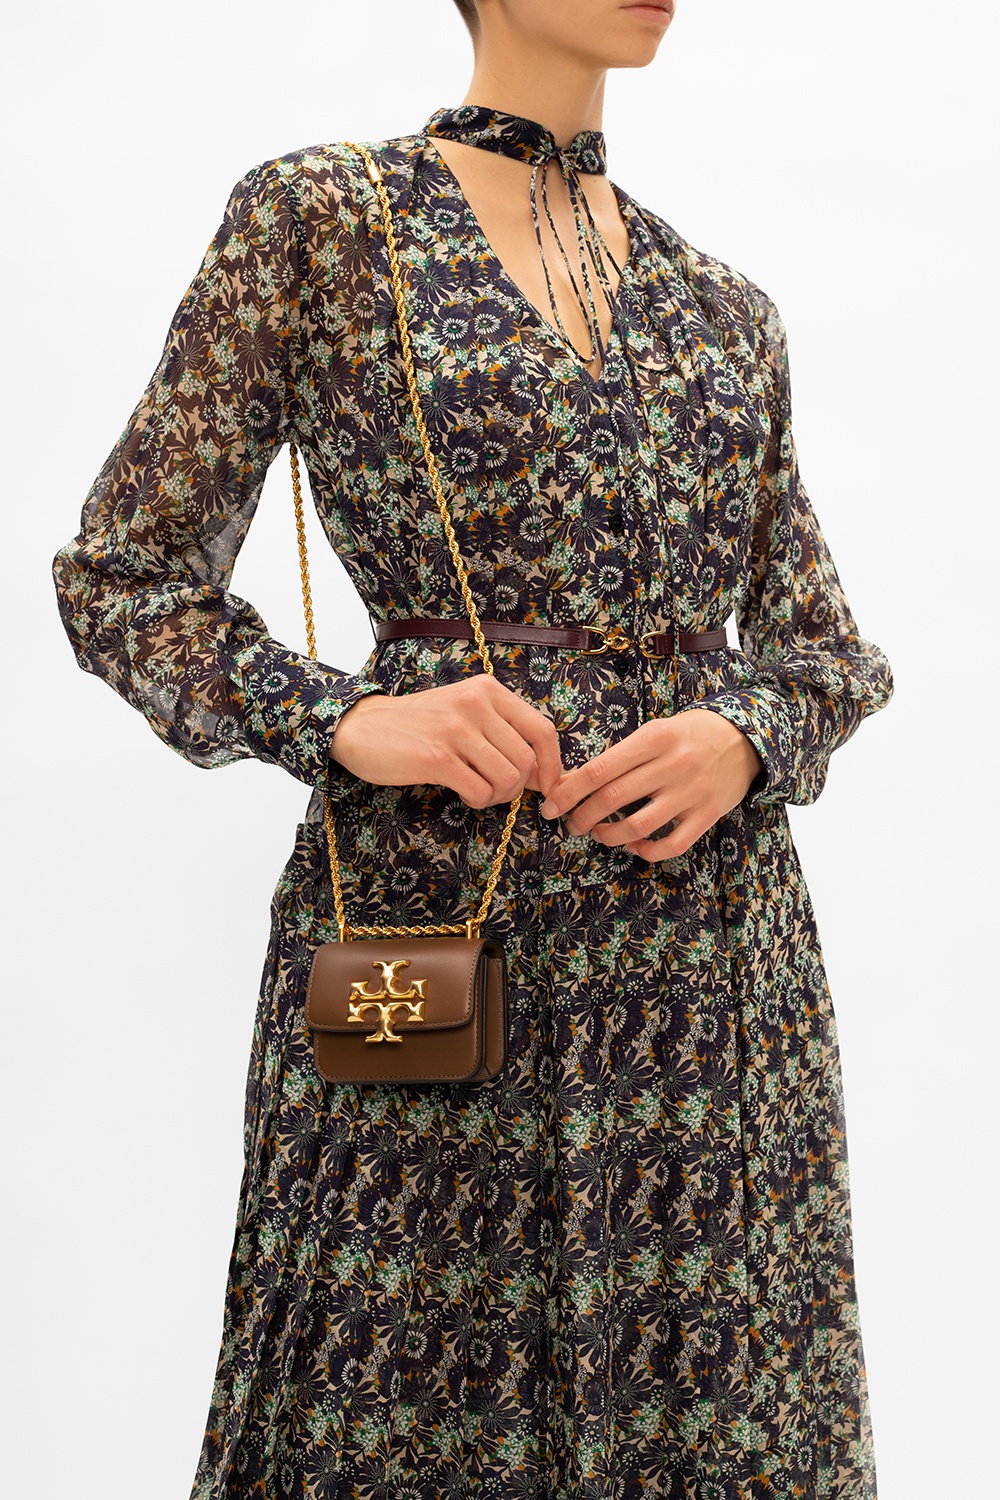 Tory Burch Makes A Bold Feminine Statement Through The New Eleanor Bag  Silhouette 